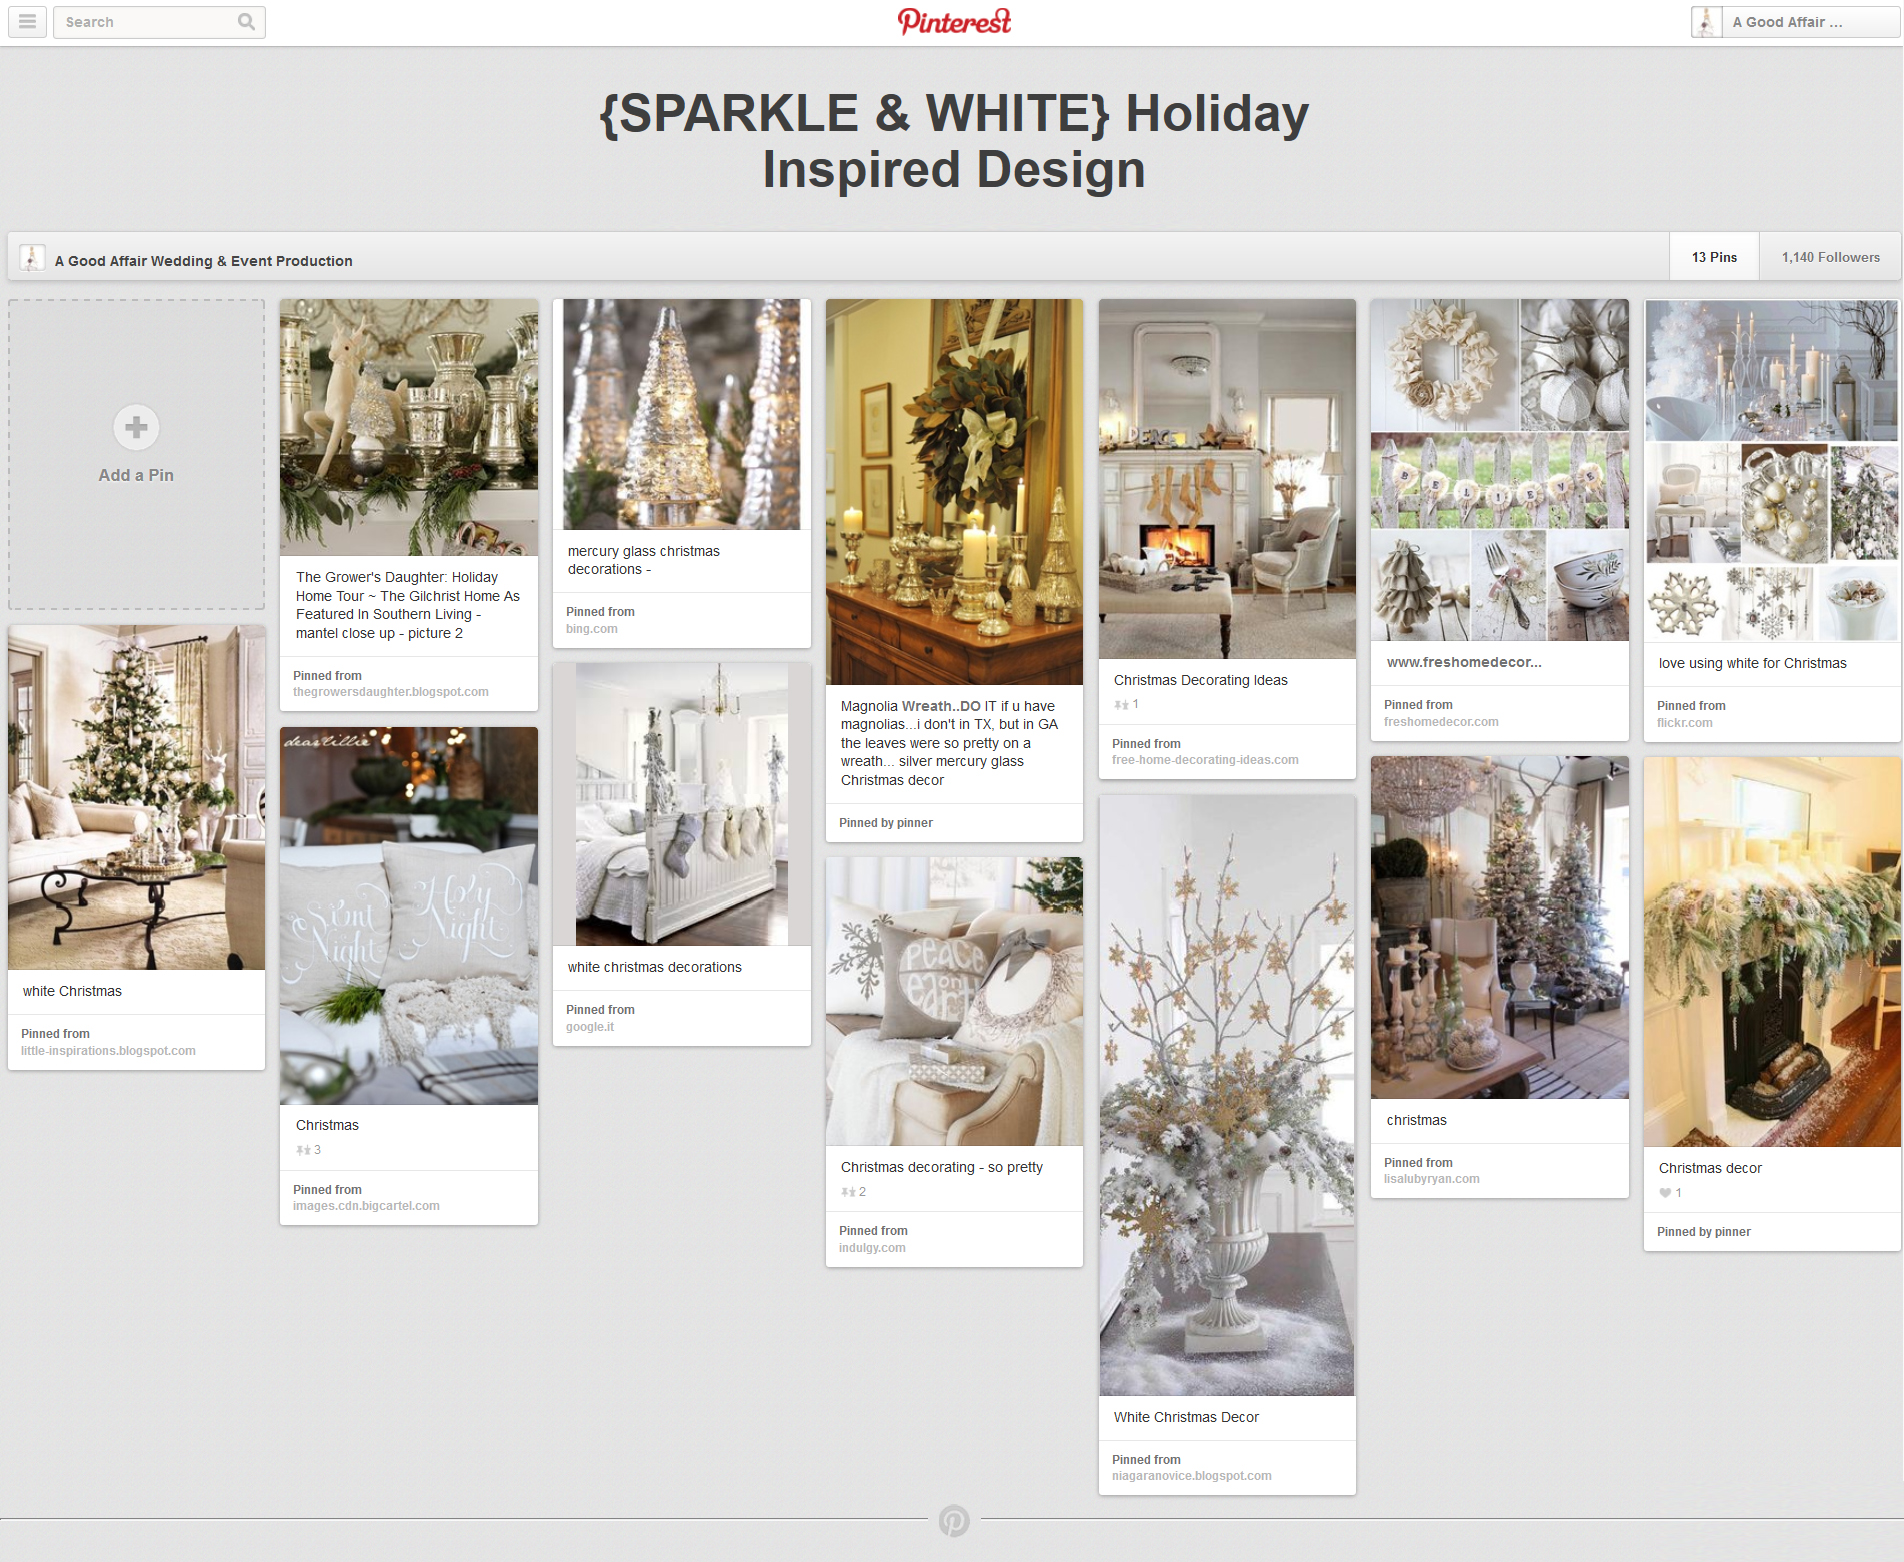 Holiday Inspiration, Sparkle and White Holiday decor, A Good Affair Wedding & Event Production